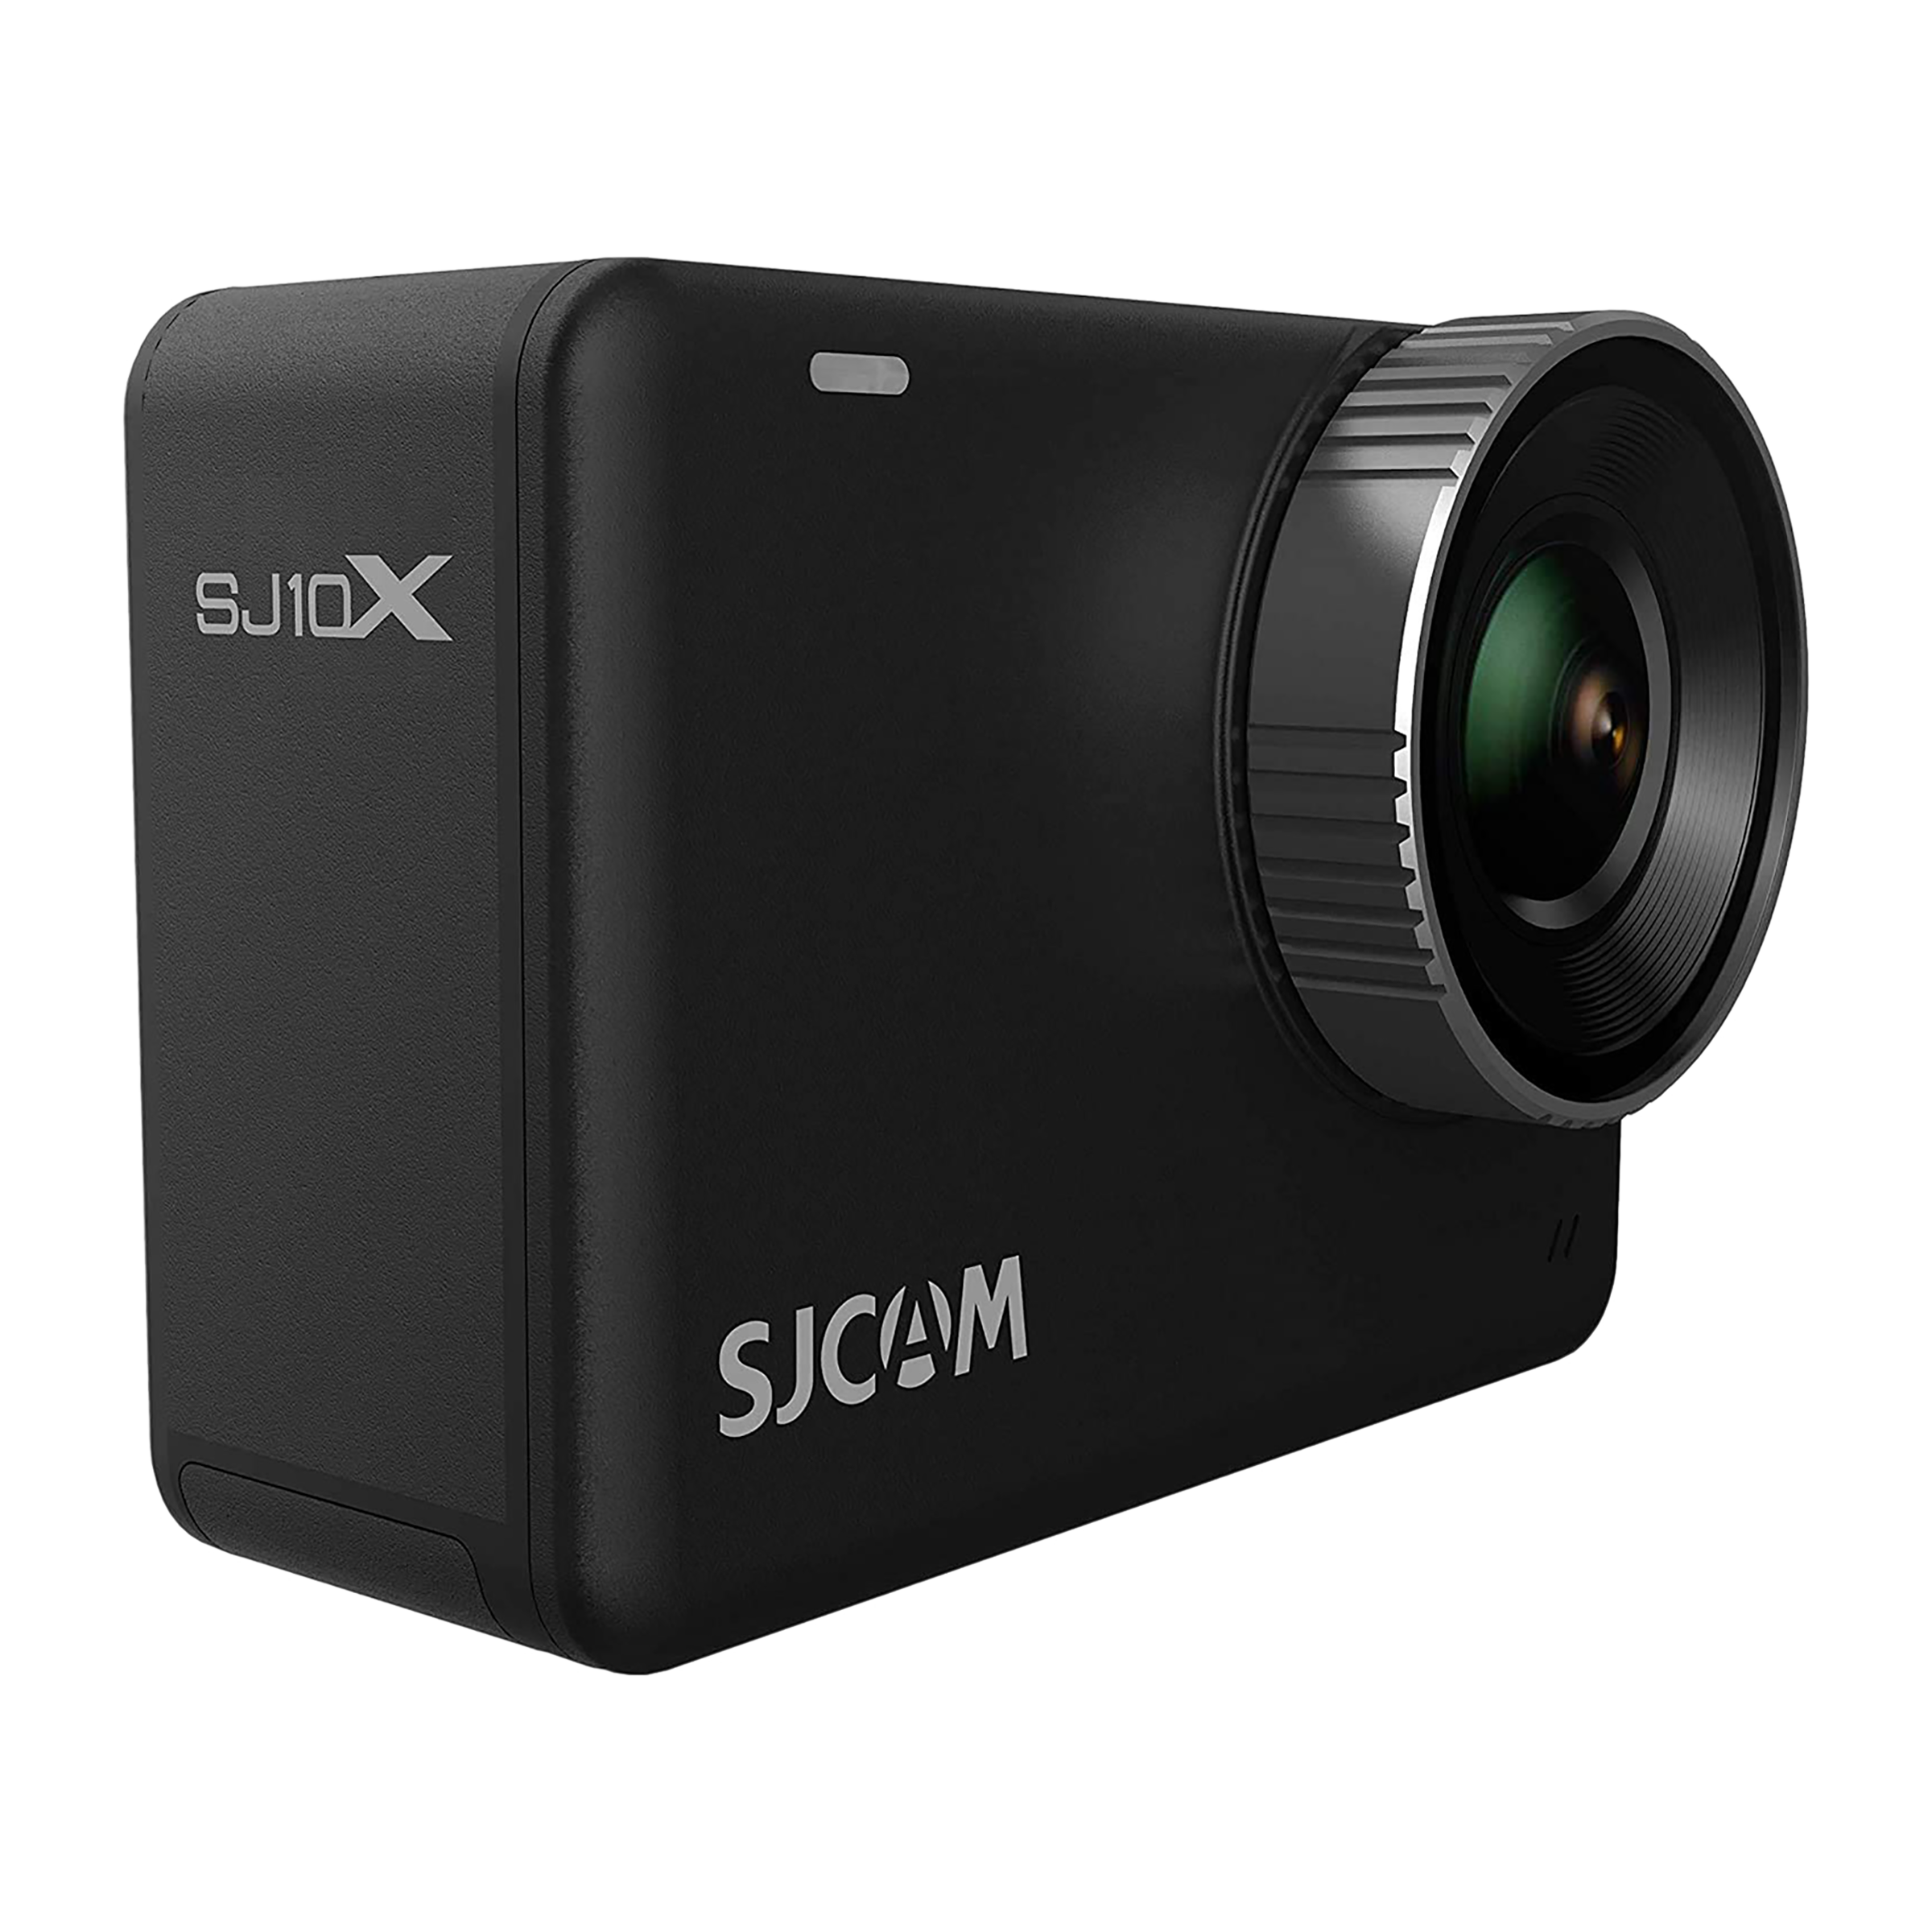 SJCAM SJ10X 4K and 12MP 60 FPS Waterproof Action Camera with Gyro Stabilization (Black)